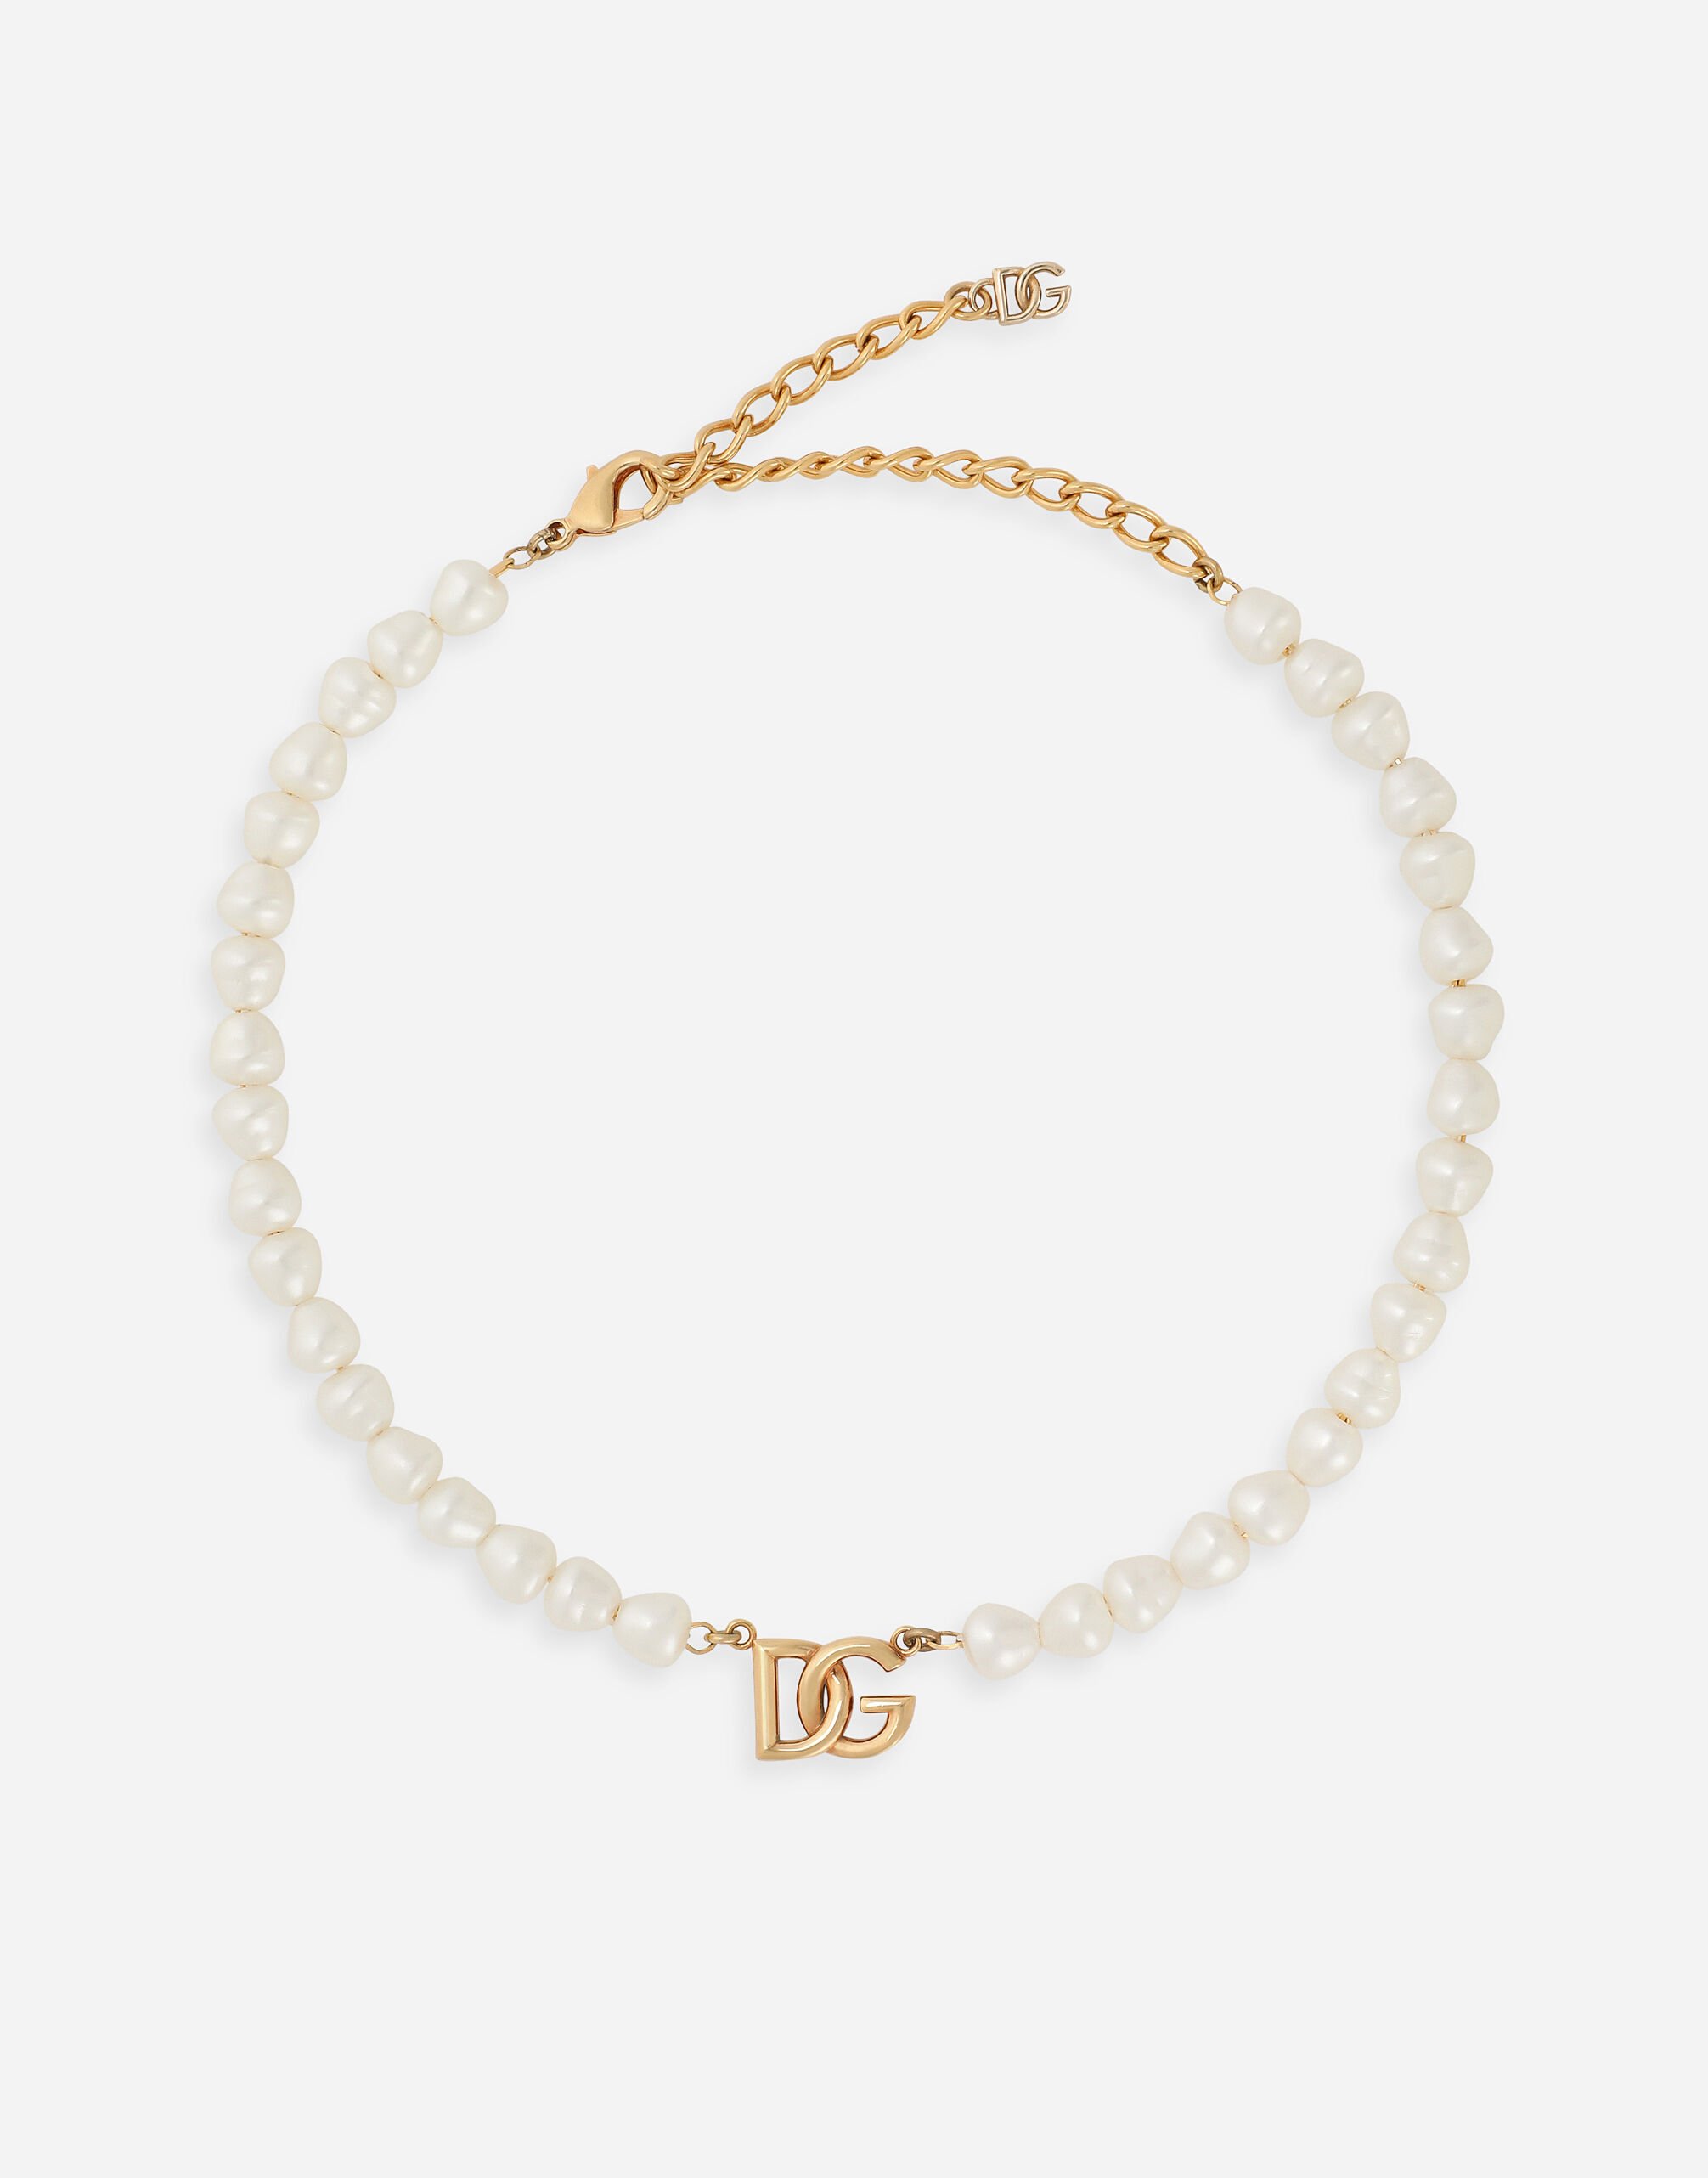 ${brand} Link necklace with pearls and DG logo ${colorDescription} ${masterID}